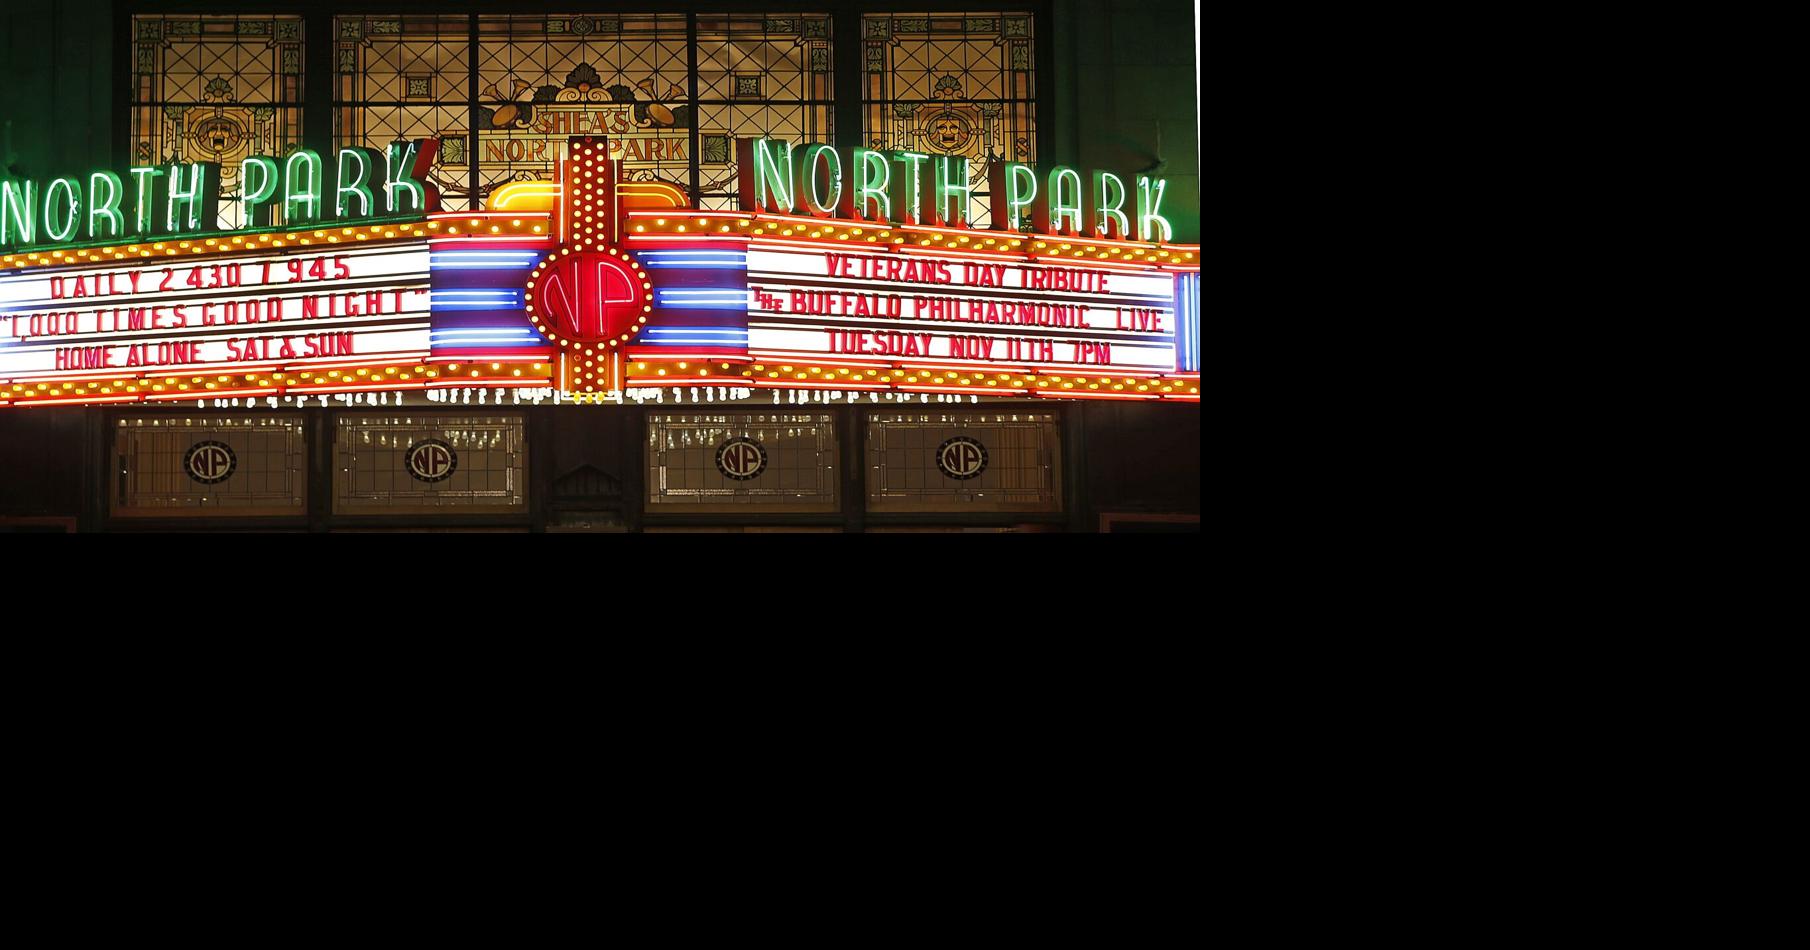 Northpark Mall movie theater to get facelift